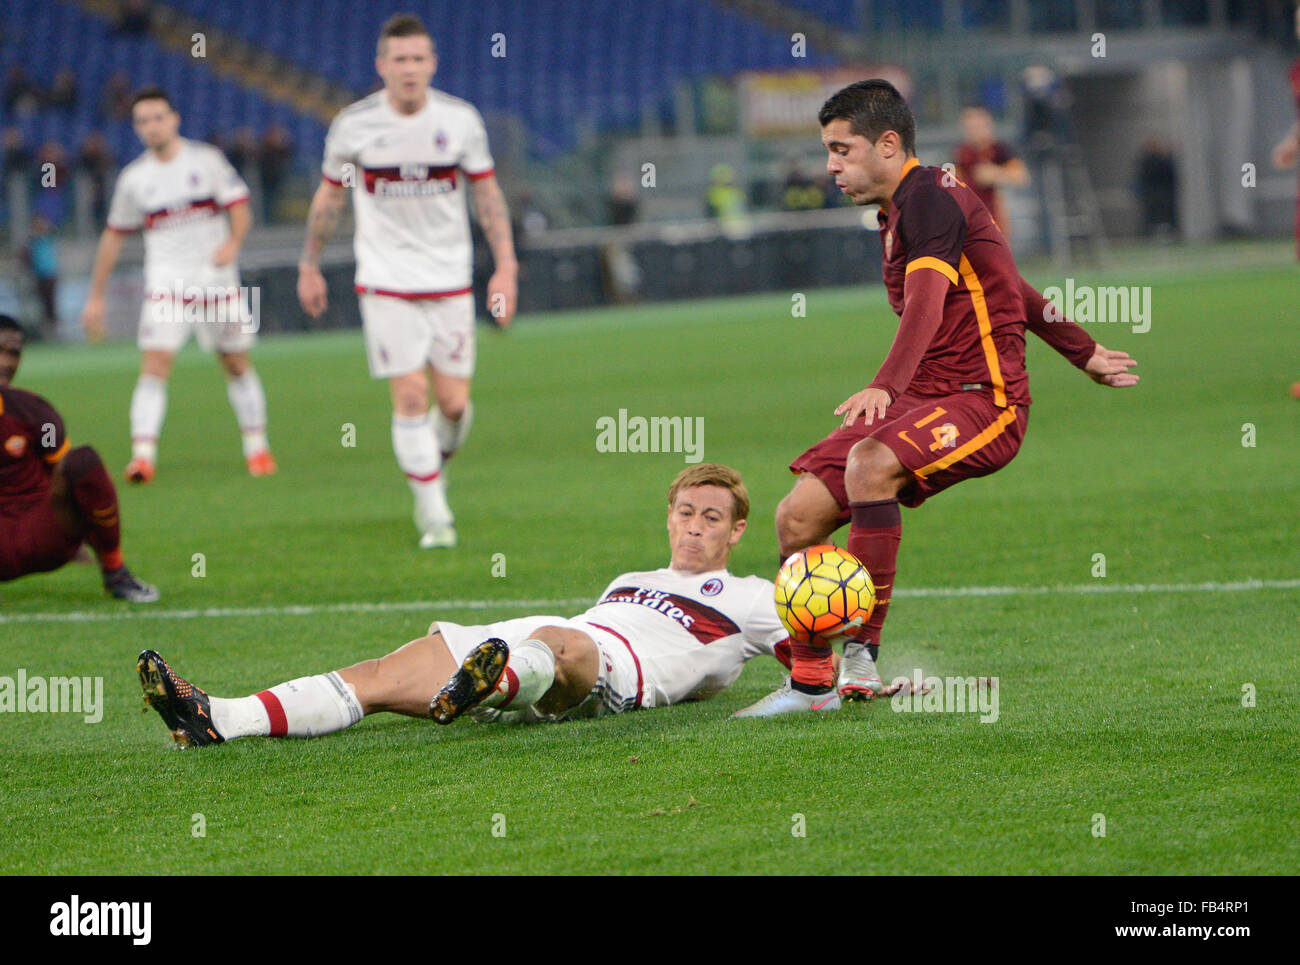 Rome, Italy. 09th Jan, 2016. Keisuke Honda, Iago Falque during the Italian Serie A football match A.S. Roma vs A.C. Milan at the Olympic Stadium in Rome, on january 09, 2016 Credit:  Silvia Lore'/Alamy Live News Stock Photo